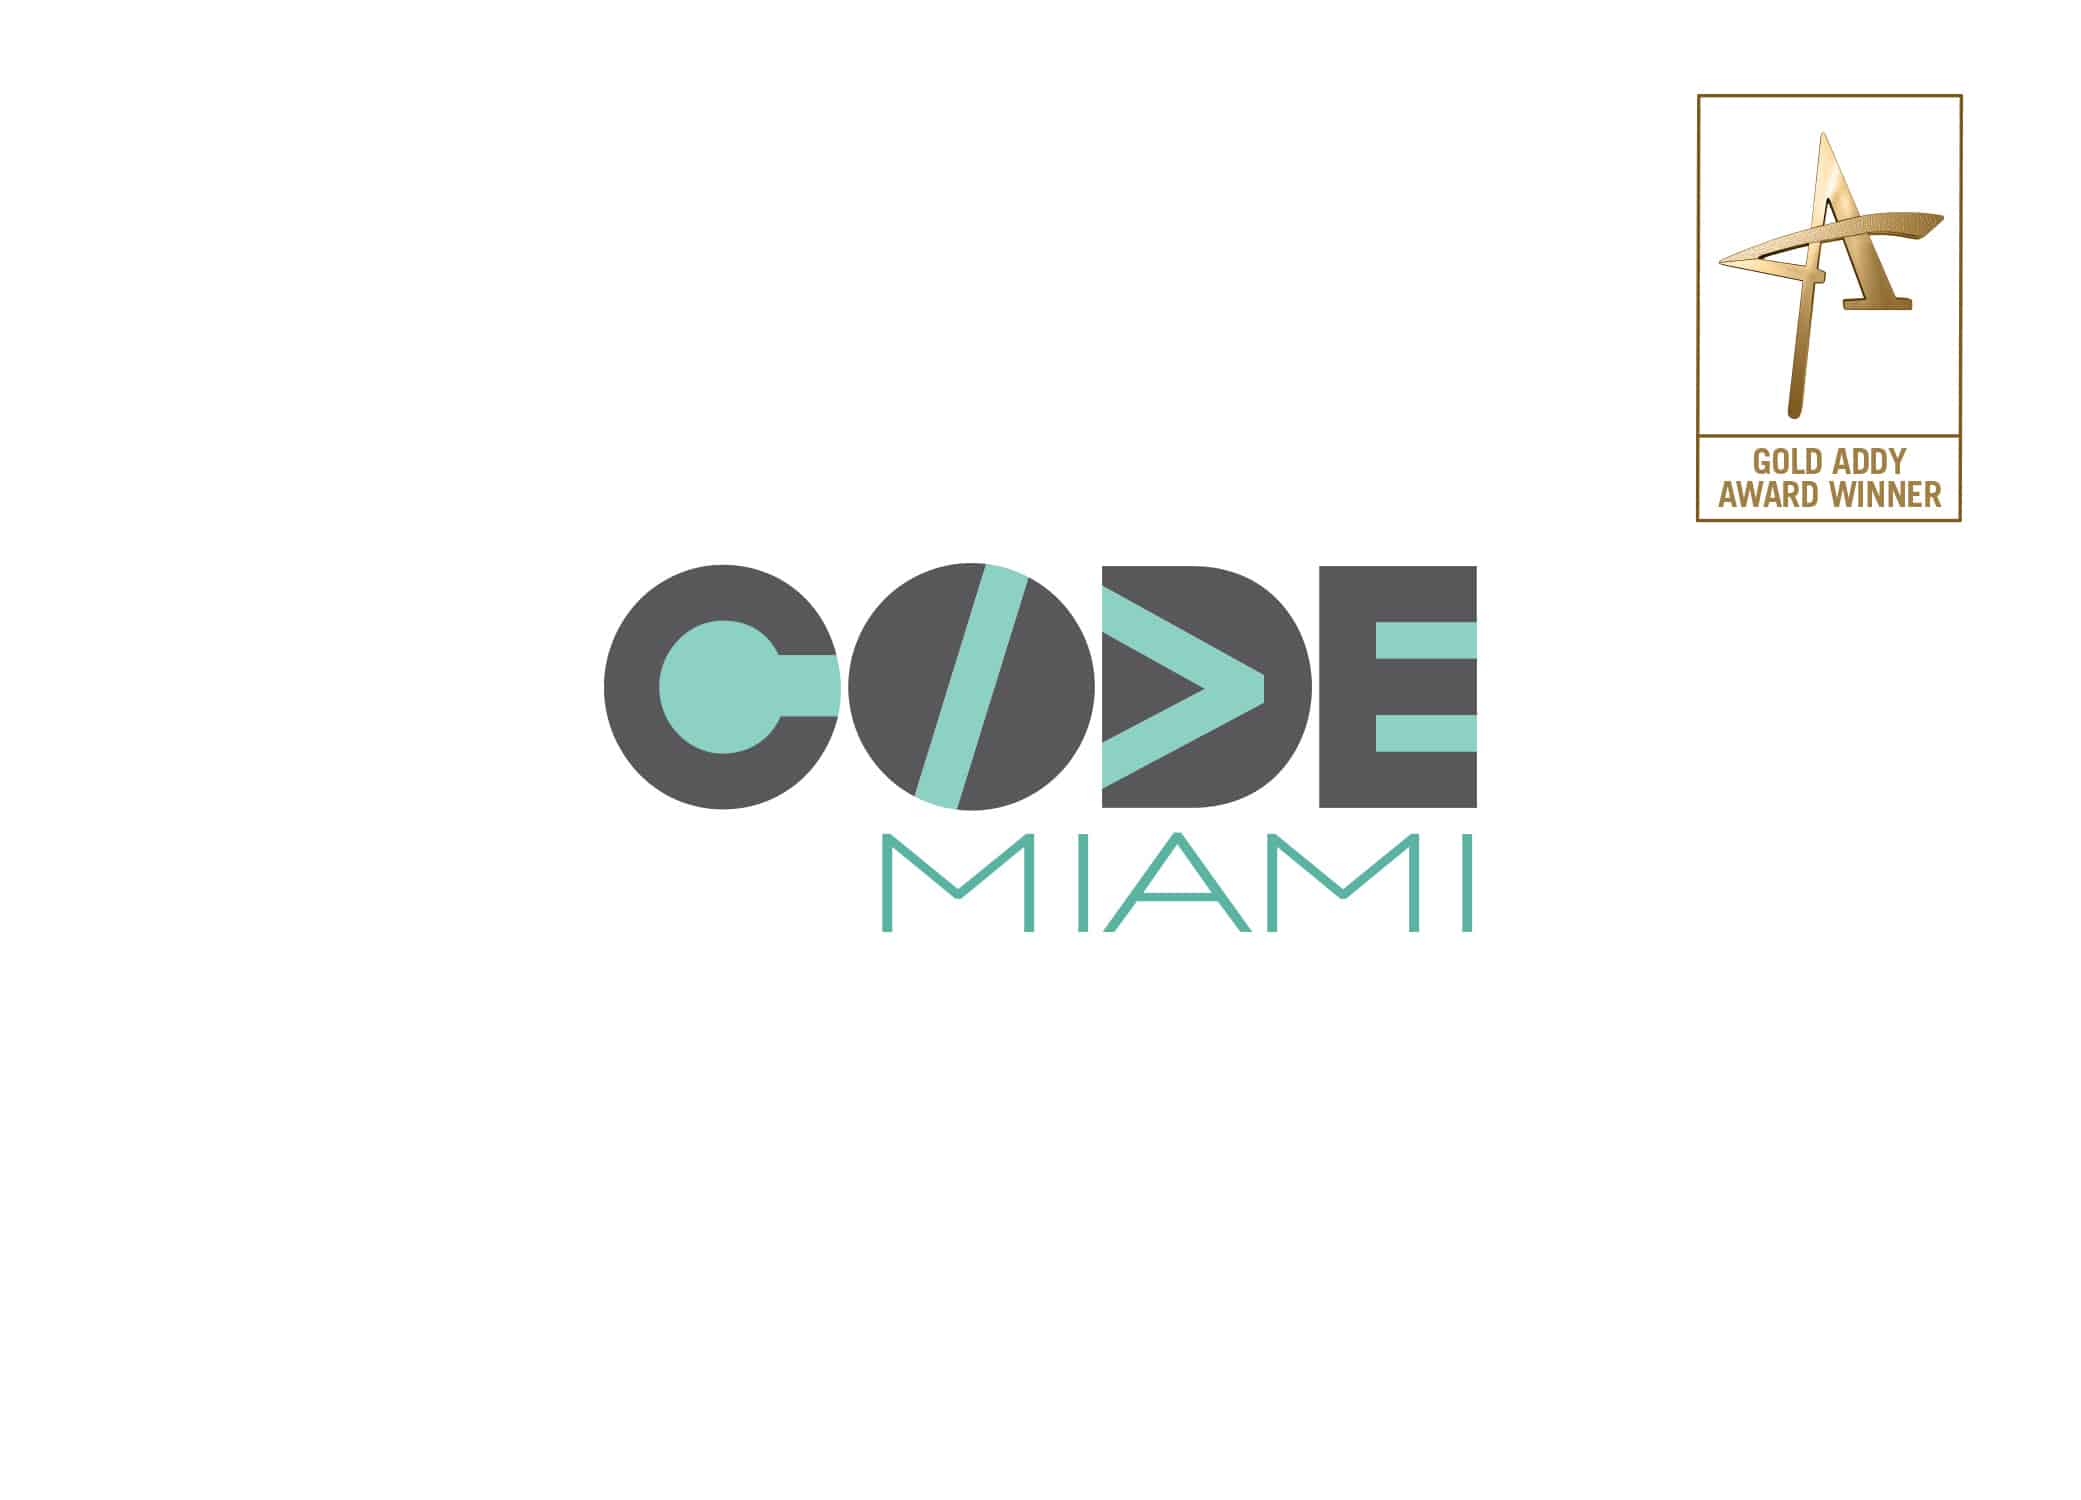 Code Miami logo design using inspiration from computer code with mint green and grey color palette.